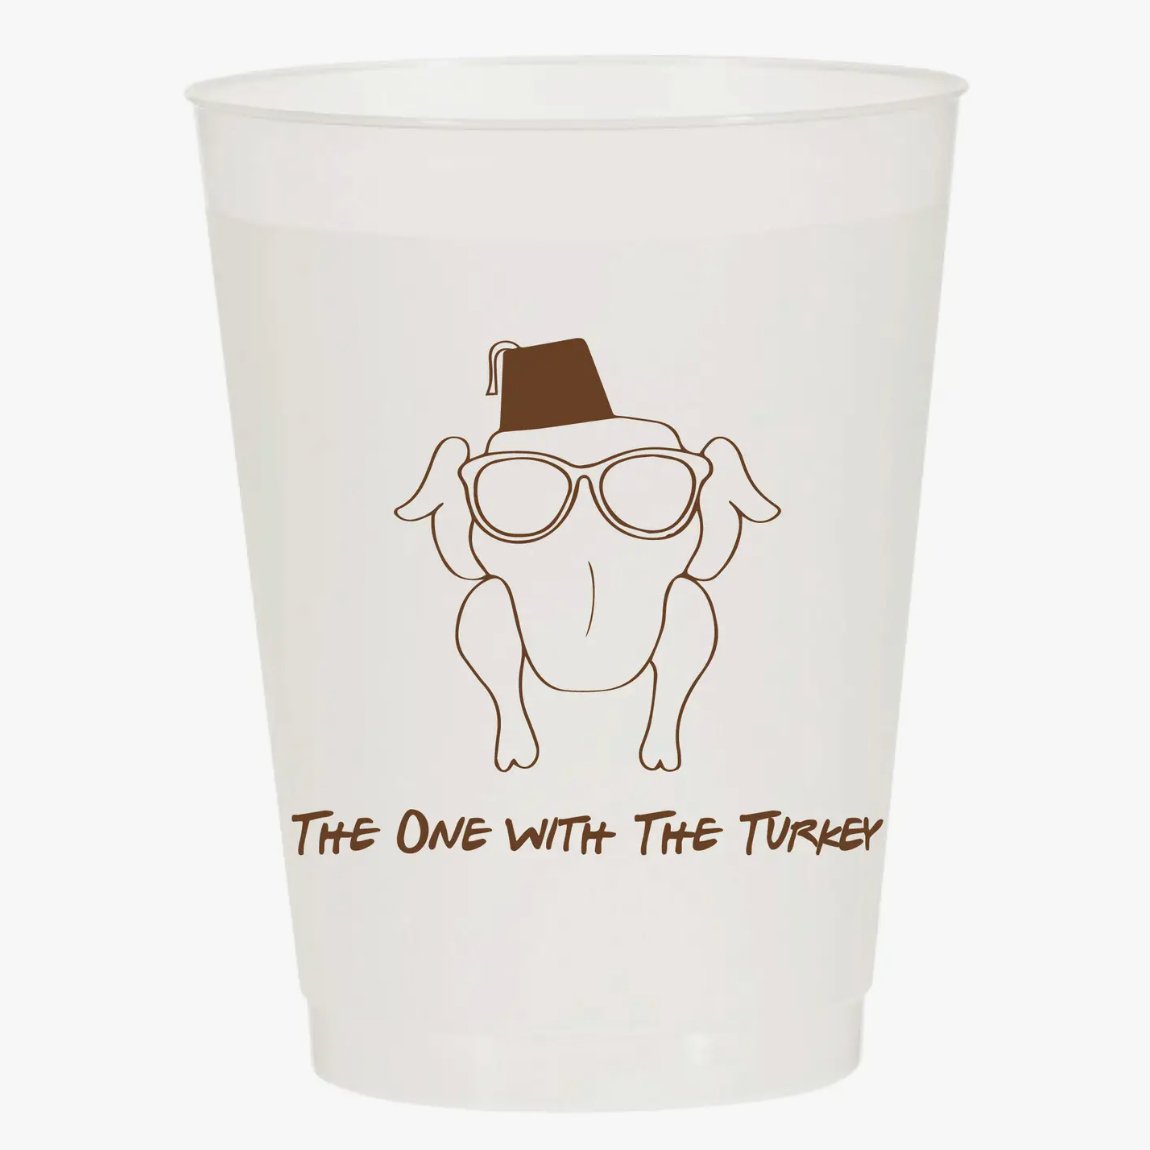 The One with the Turkey - Friends Themed Frosted Cups, Set of 6 - Henry + Olives